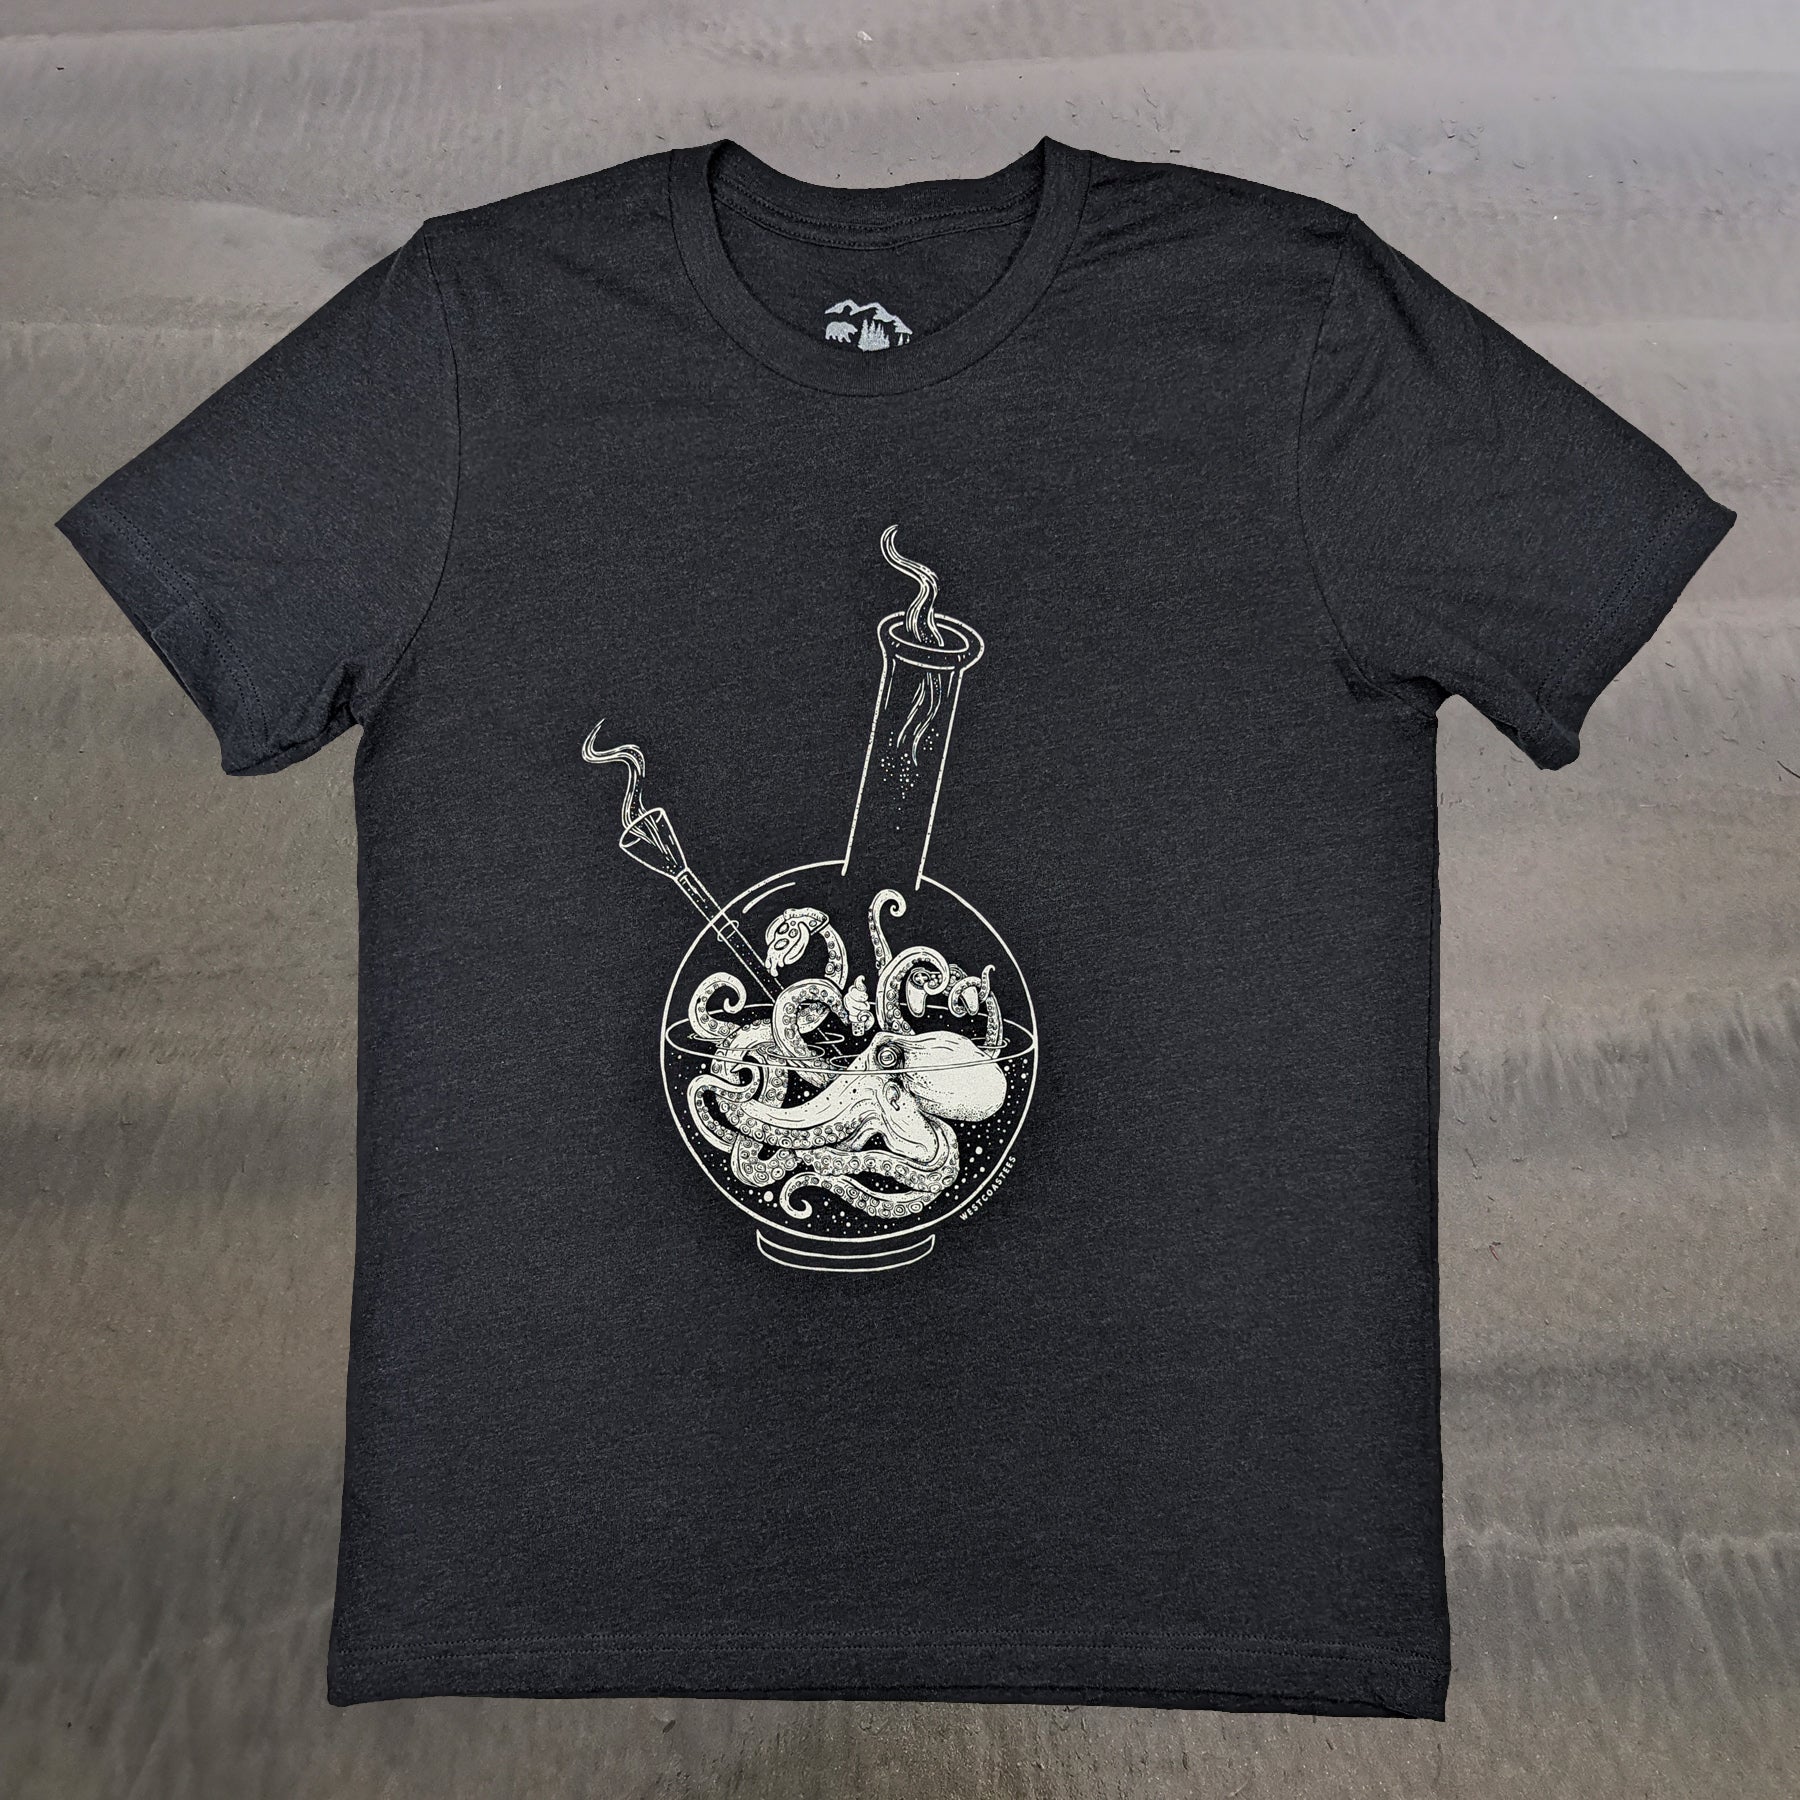 Adult Unisex Octobong Graphic Tee